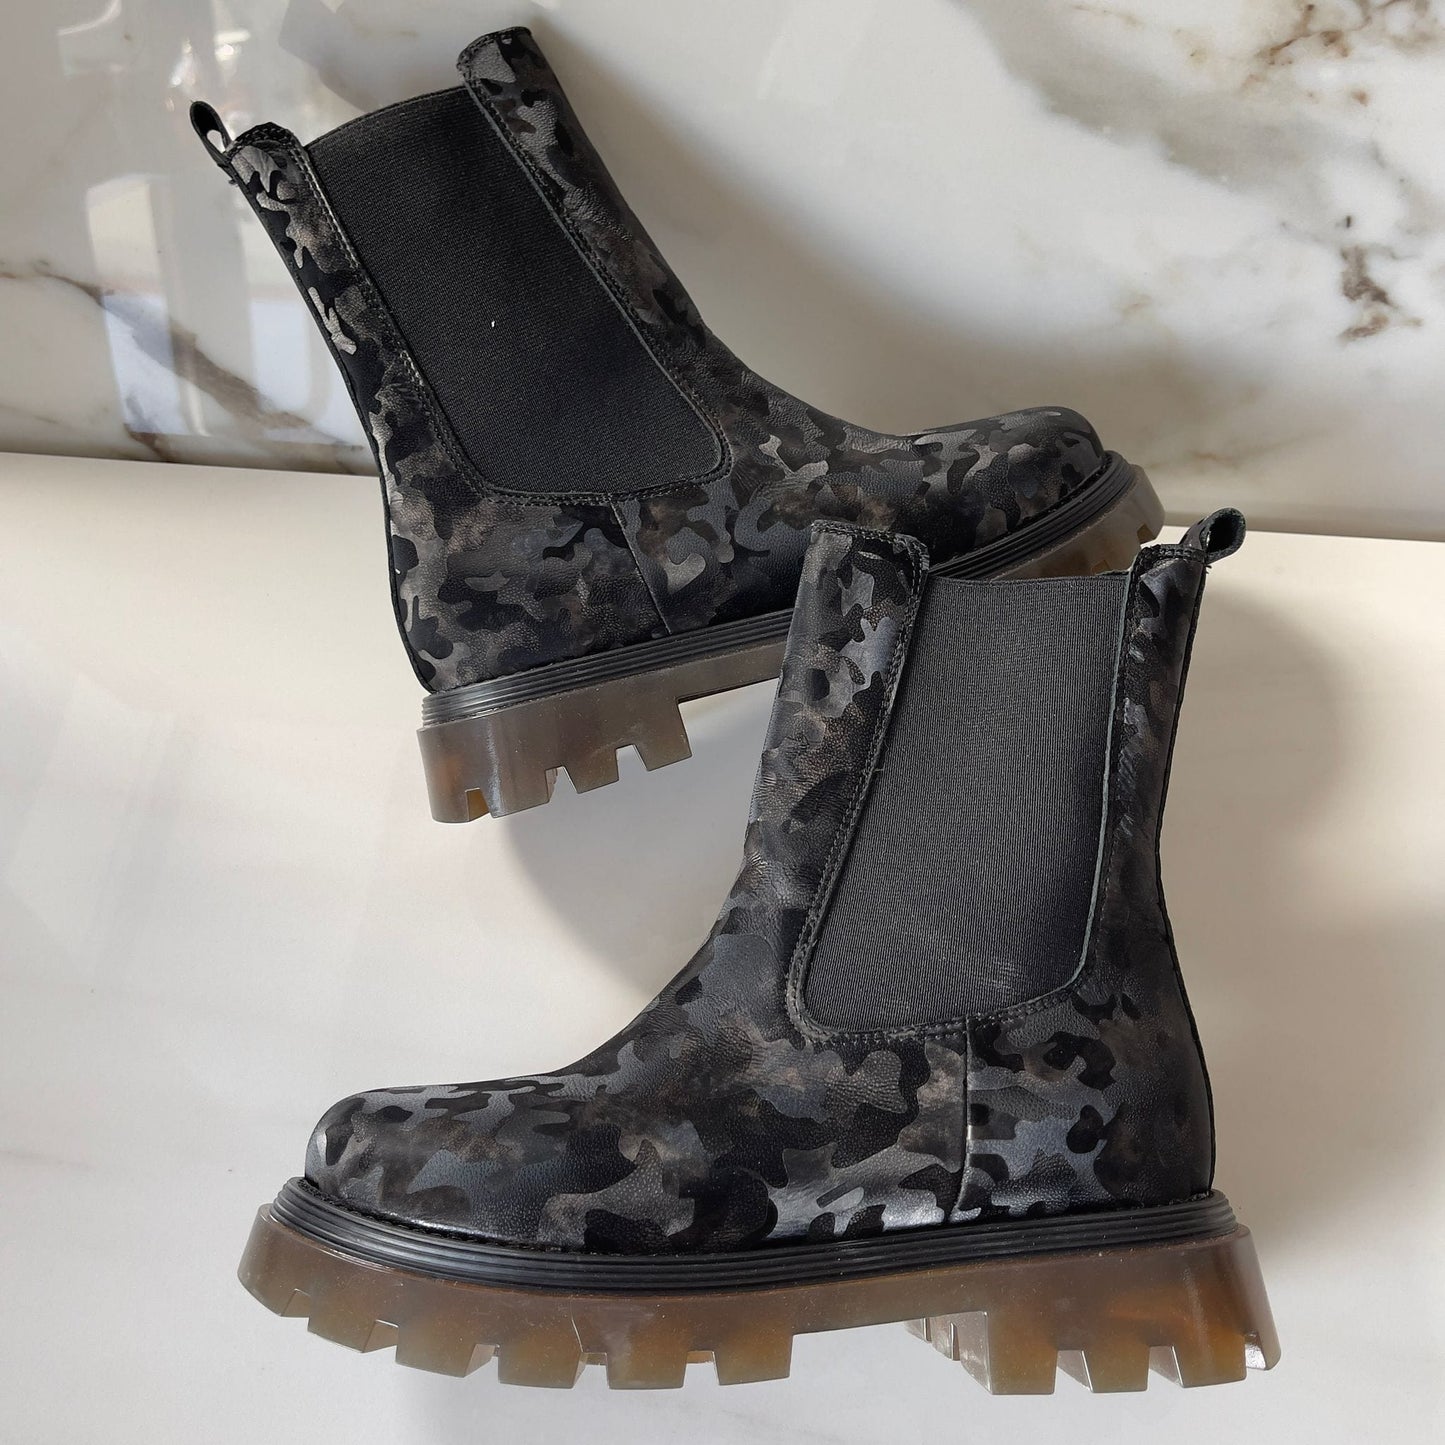 Army style ladies stomper boots in black and grey leather